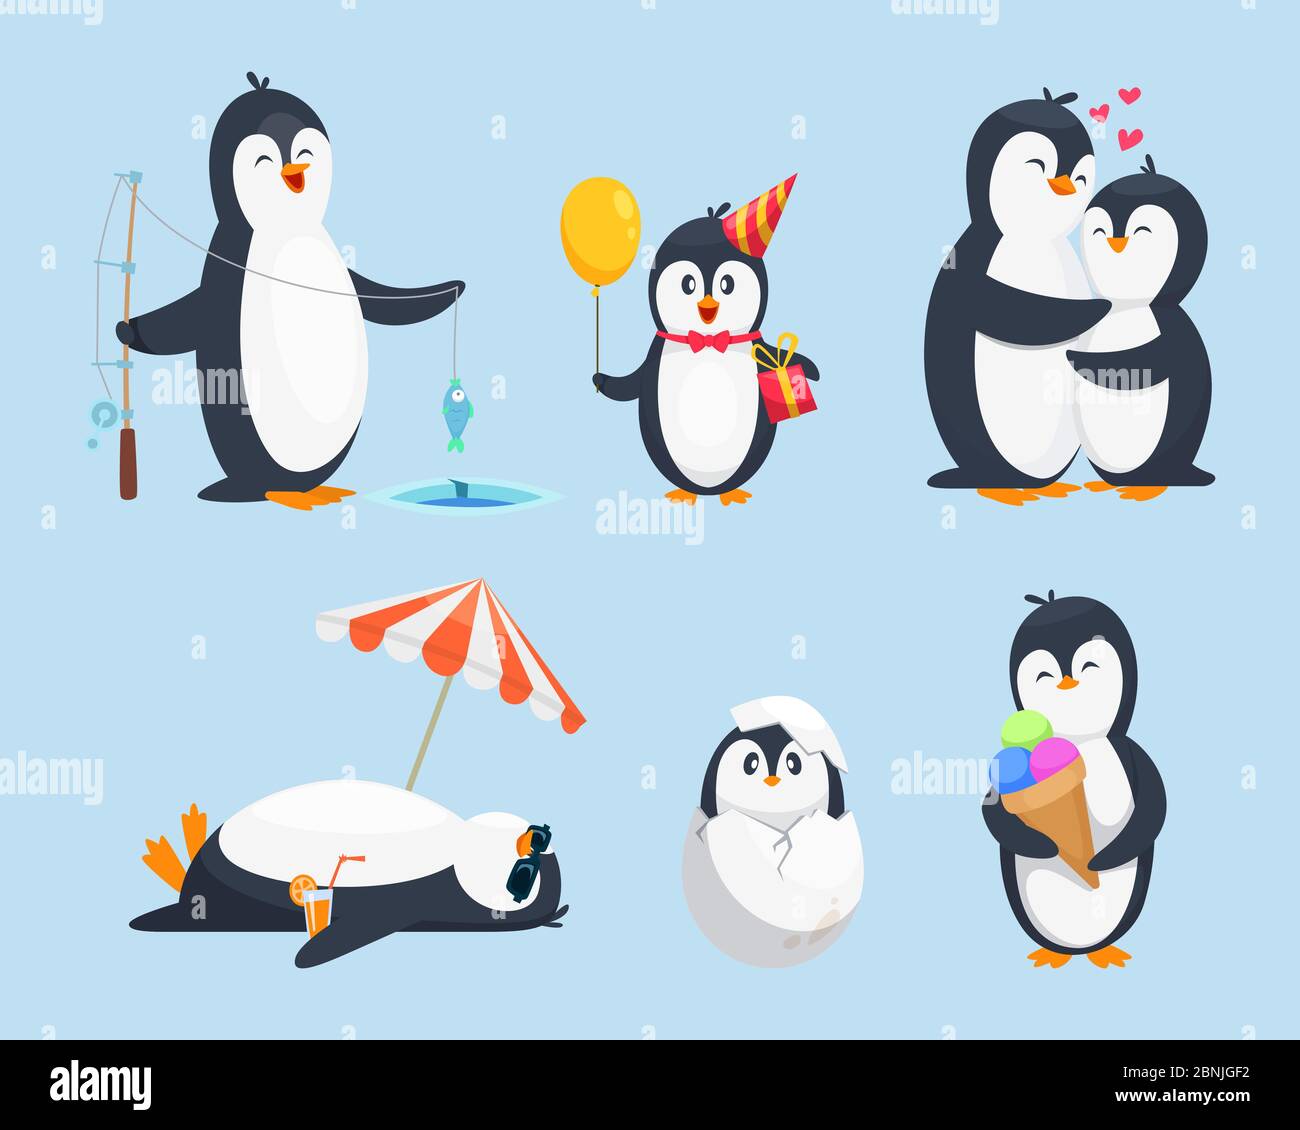 Penguin pictures cartoon Stock Vector Images - Alamy